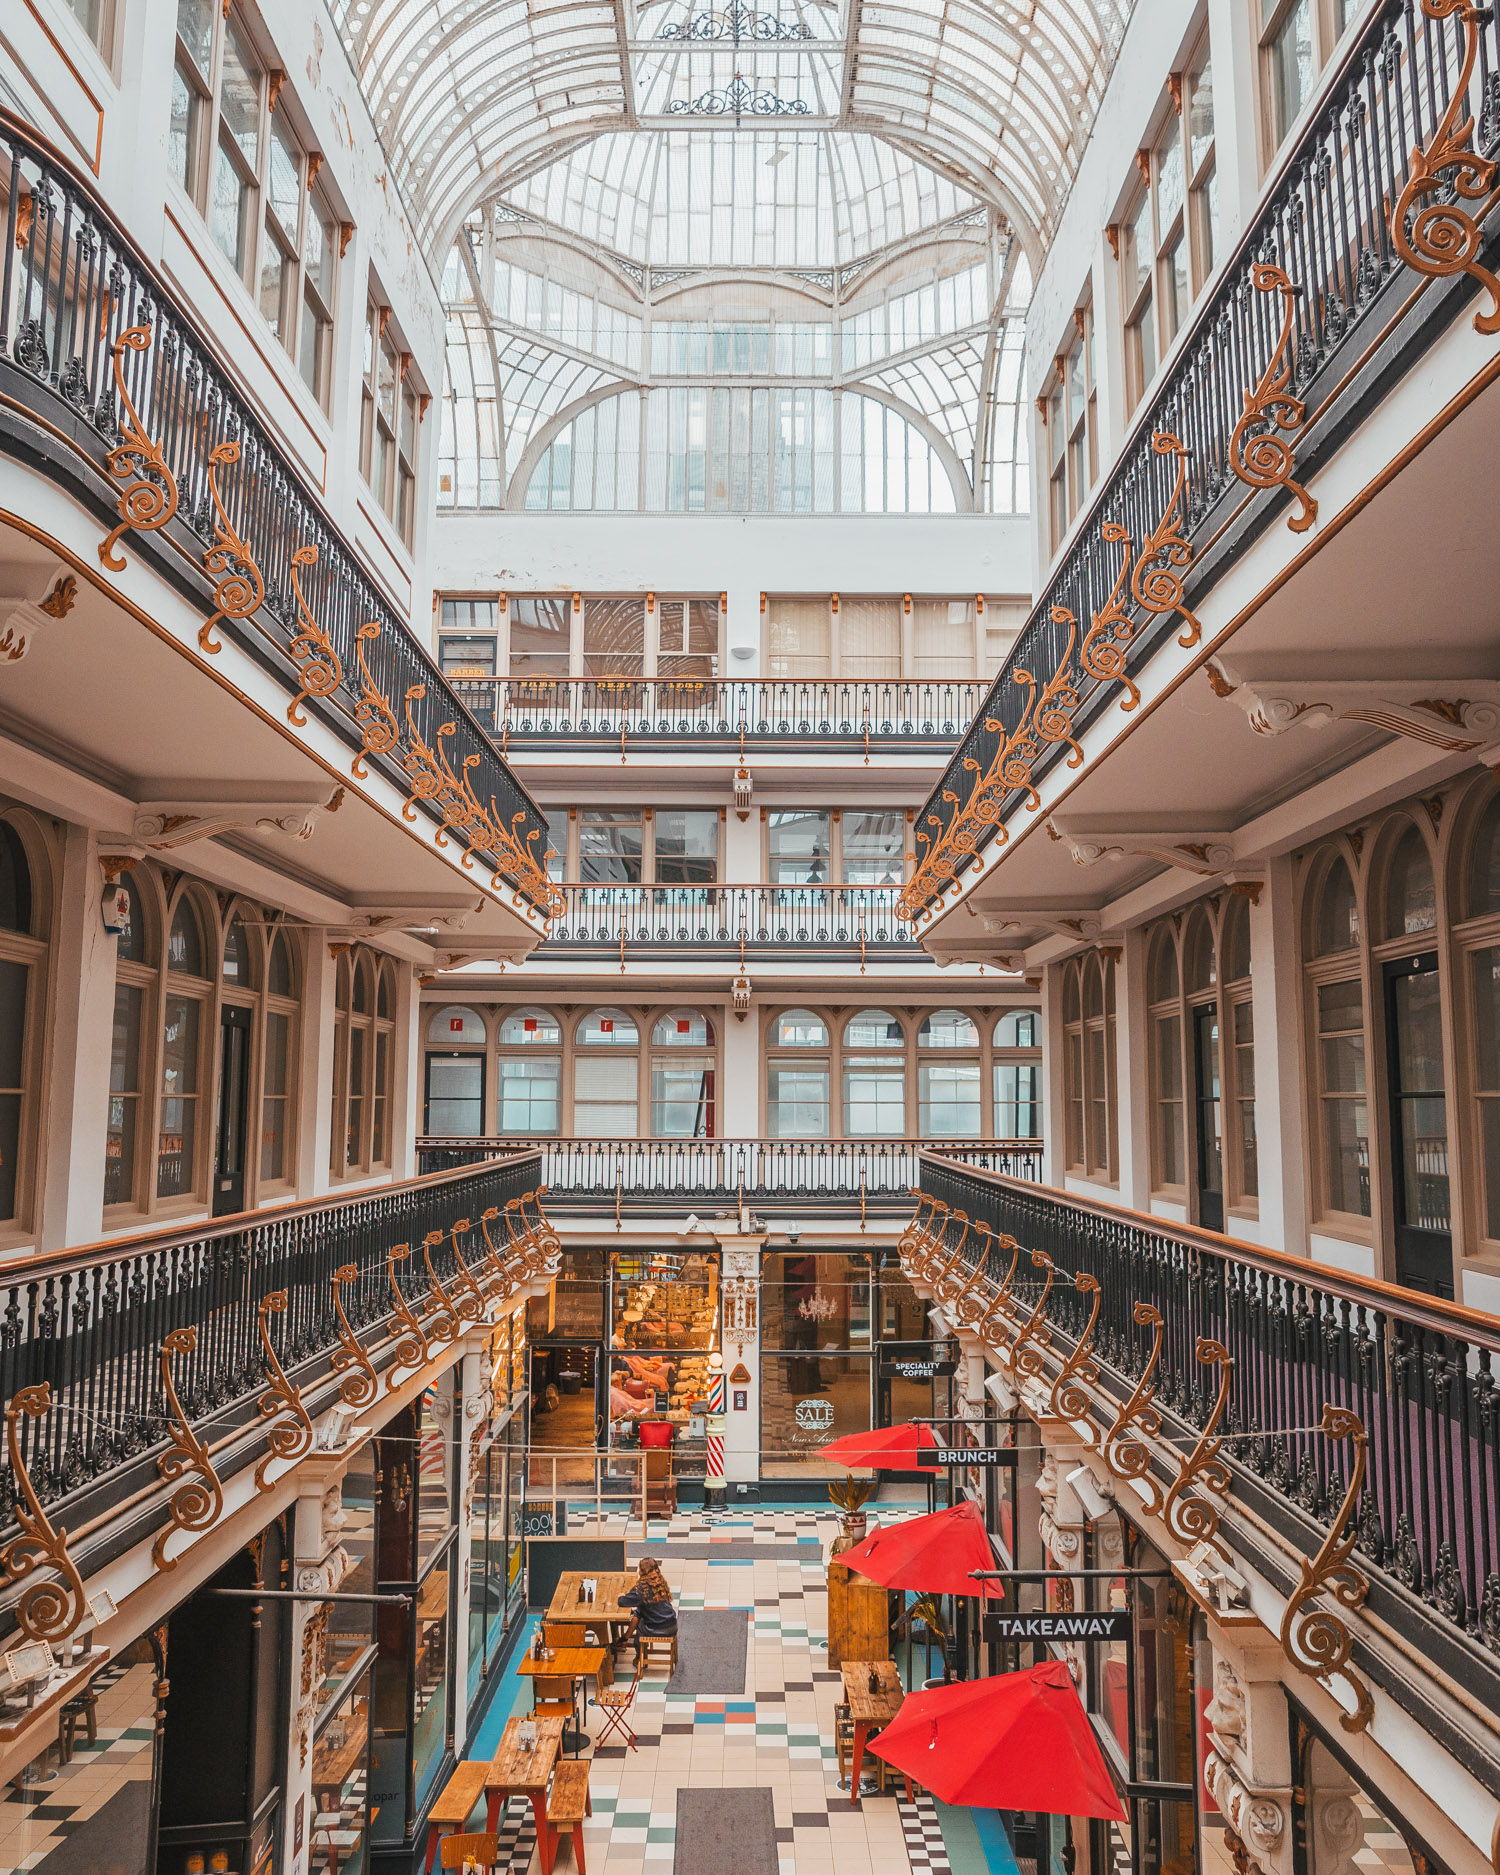 Barton Arcade - The Best Photo Spots in Manchester, England